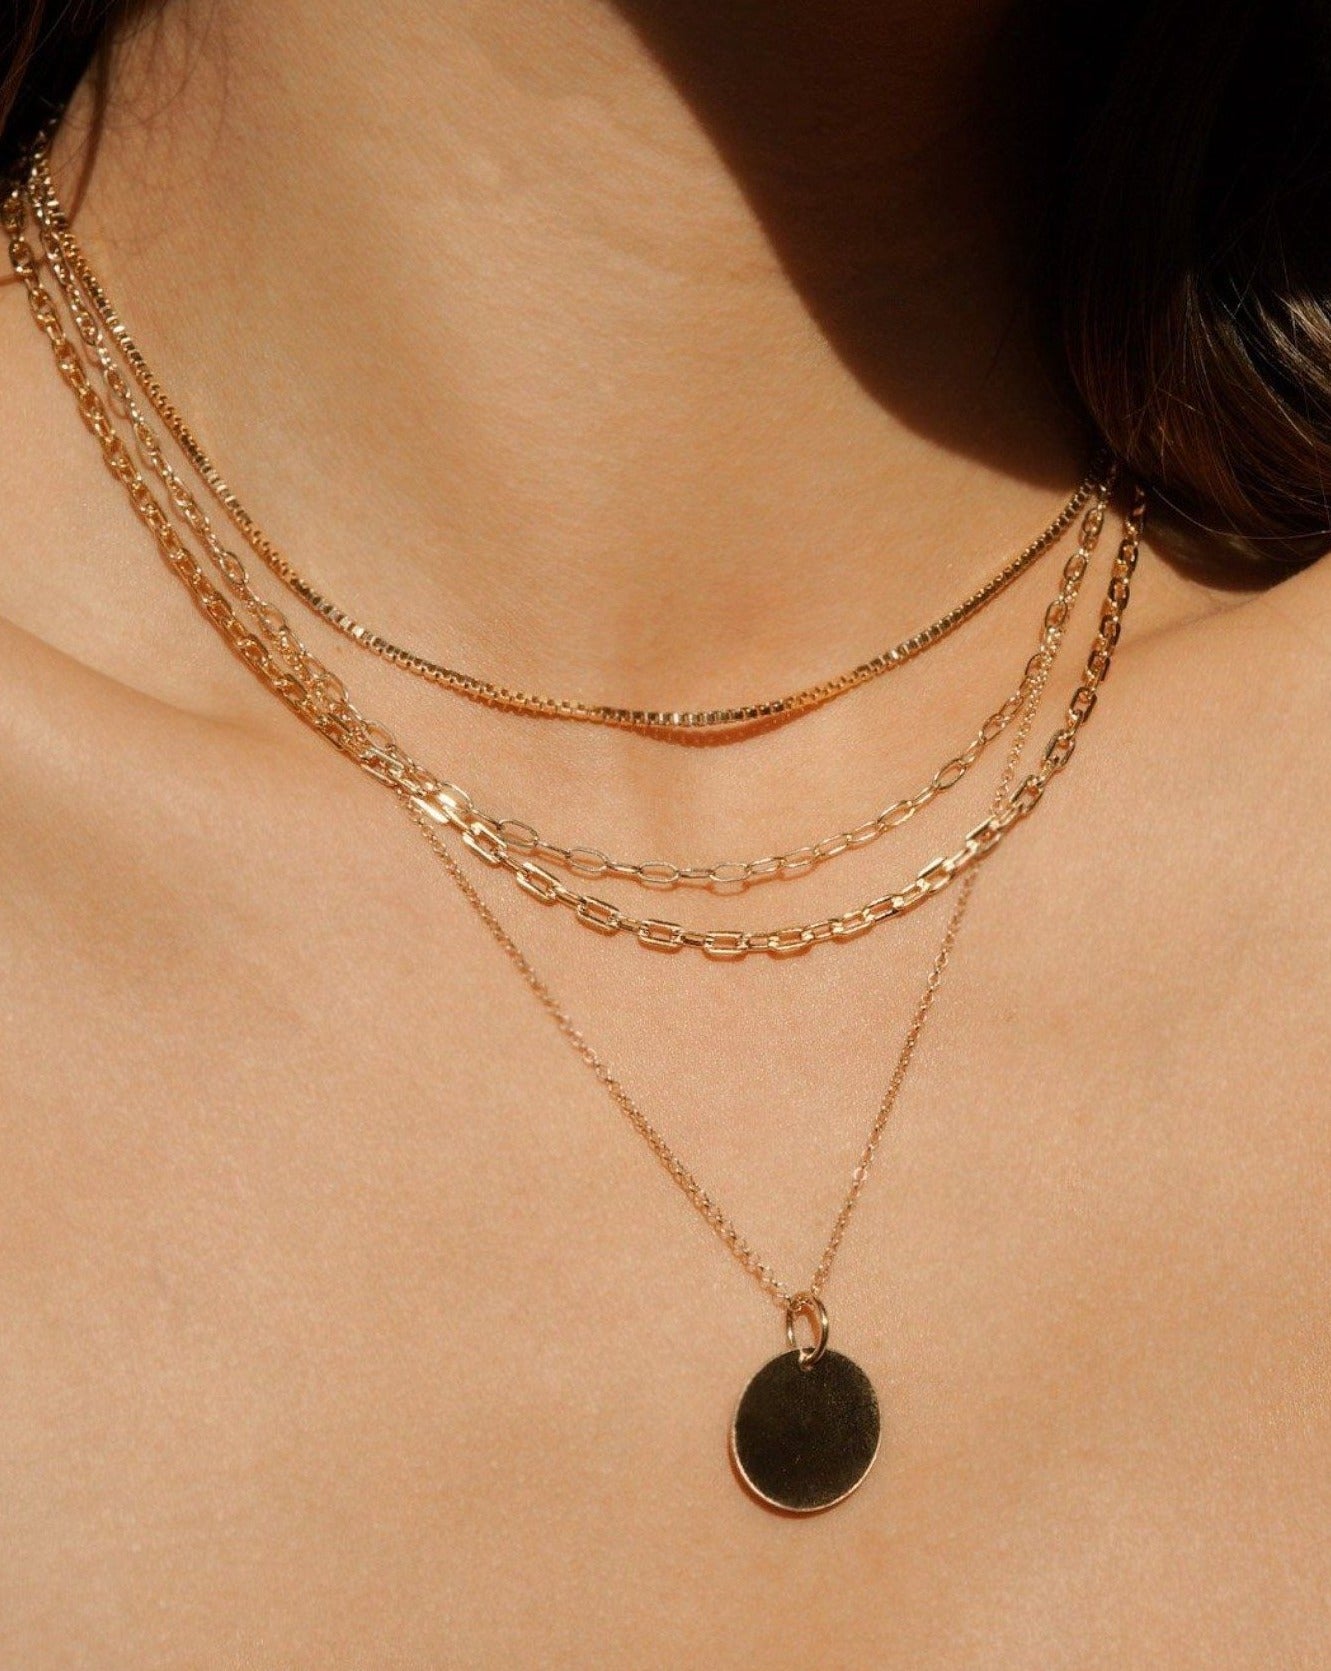 Blaire Chain Necklace by KOZAKH. A 15 to 17 inch adjustable length chain necklace in 14K Gold Filled.